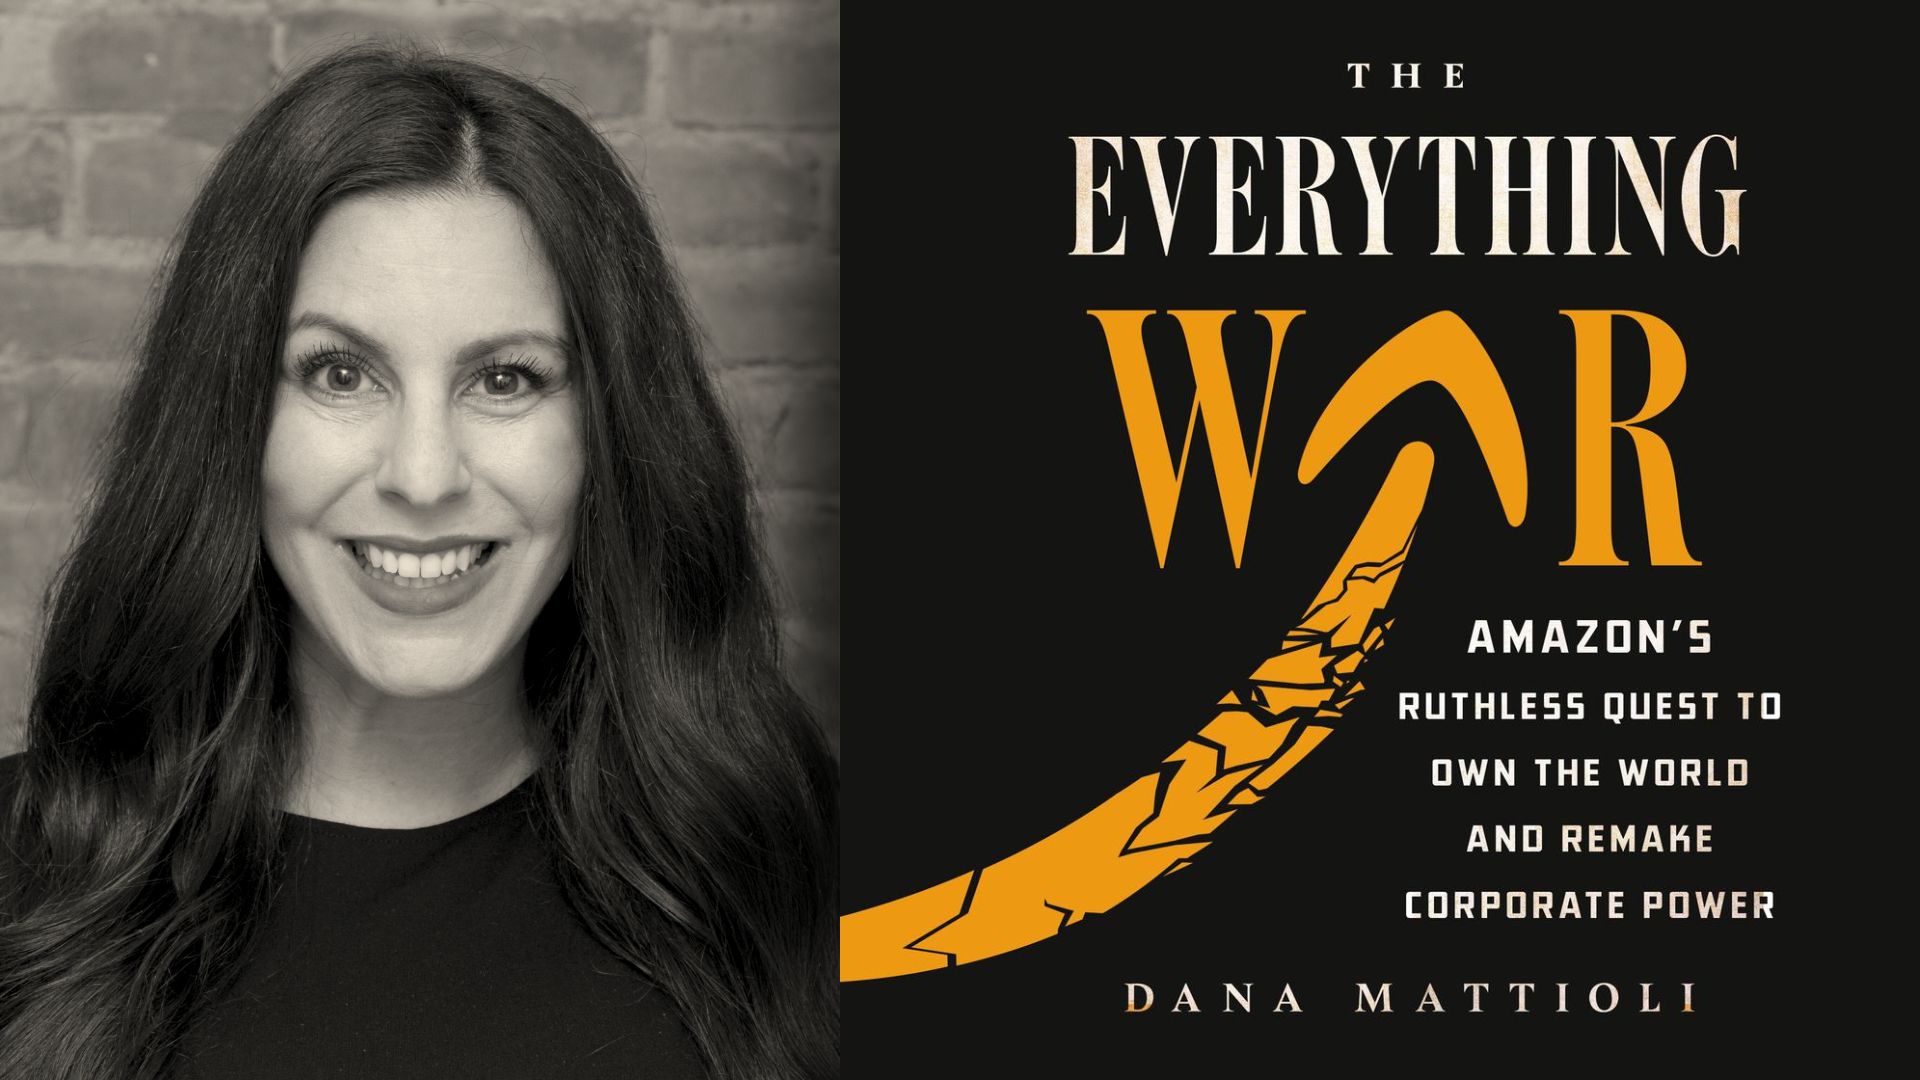 A headshot of Dana Mattioli next to the book cover for The Everything War